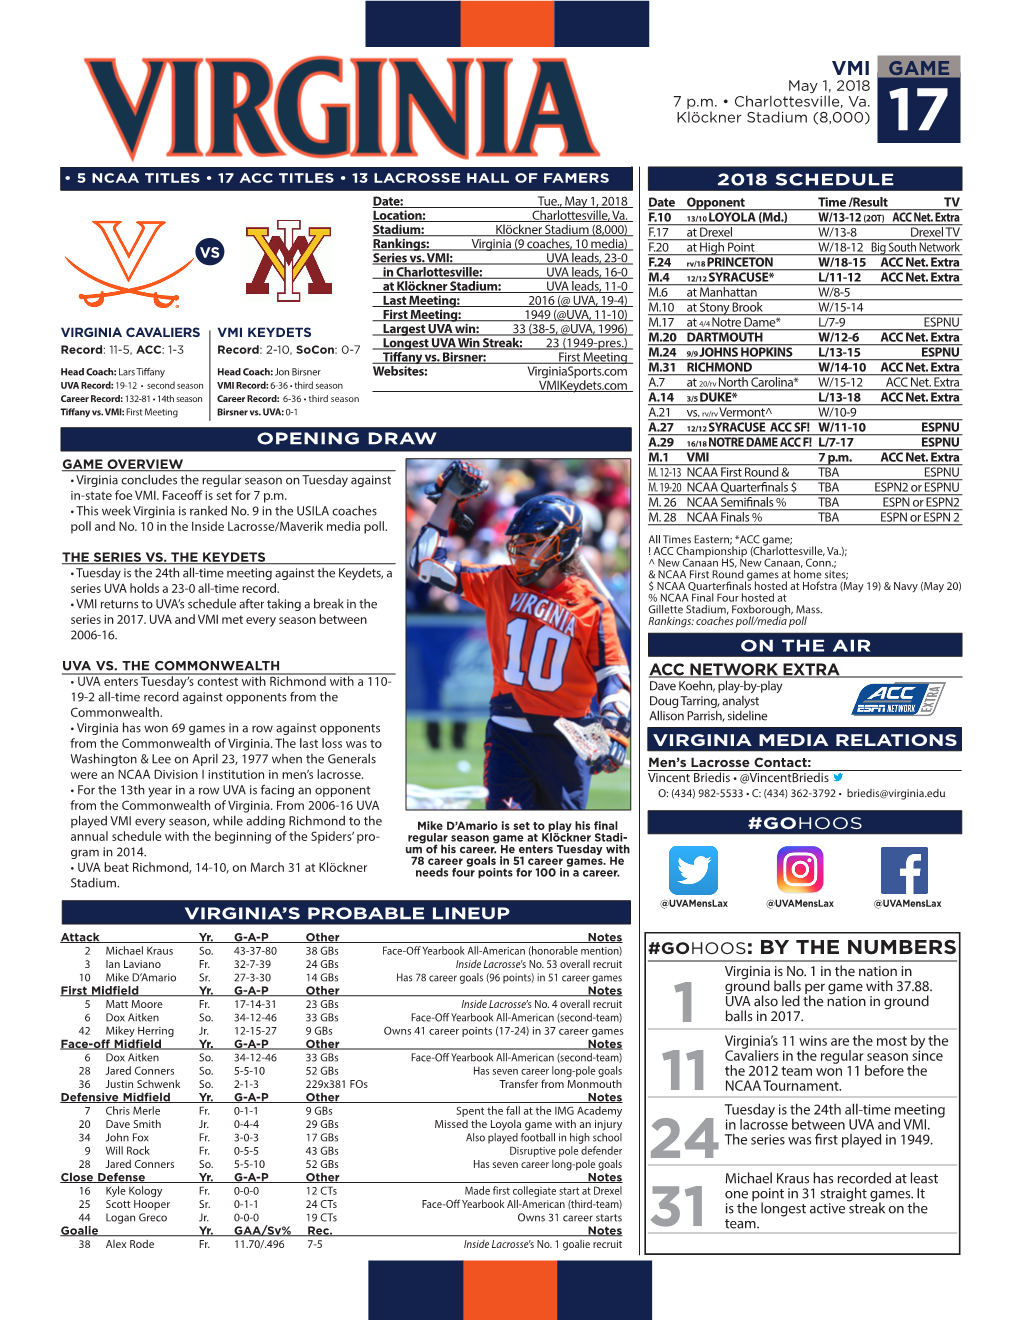 Game Vmi #Gohoos: by the Numbers